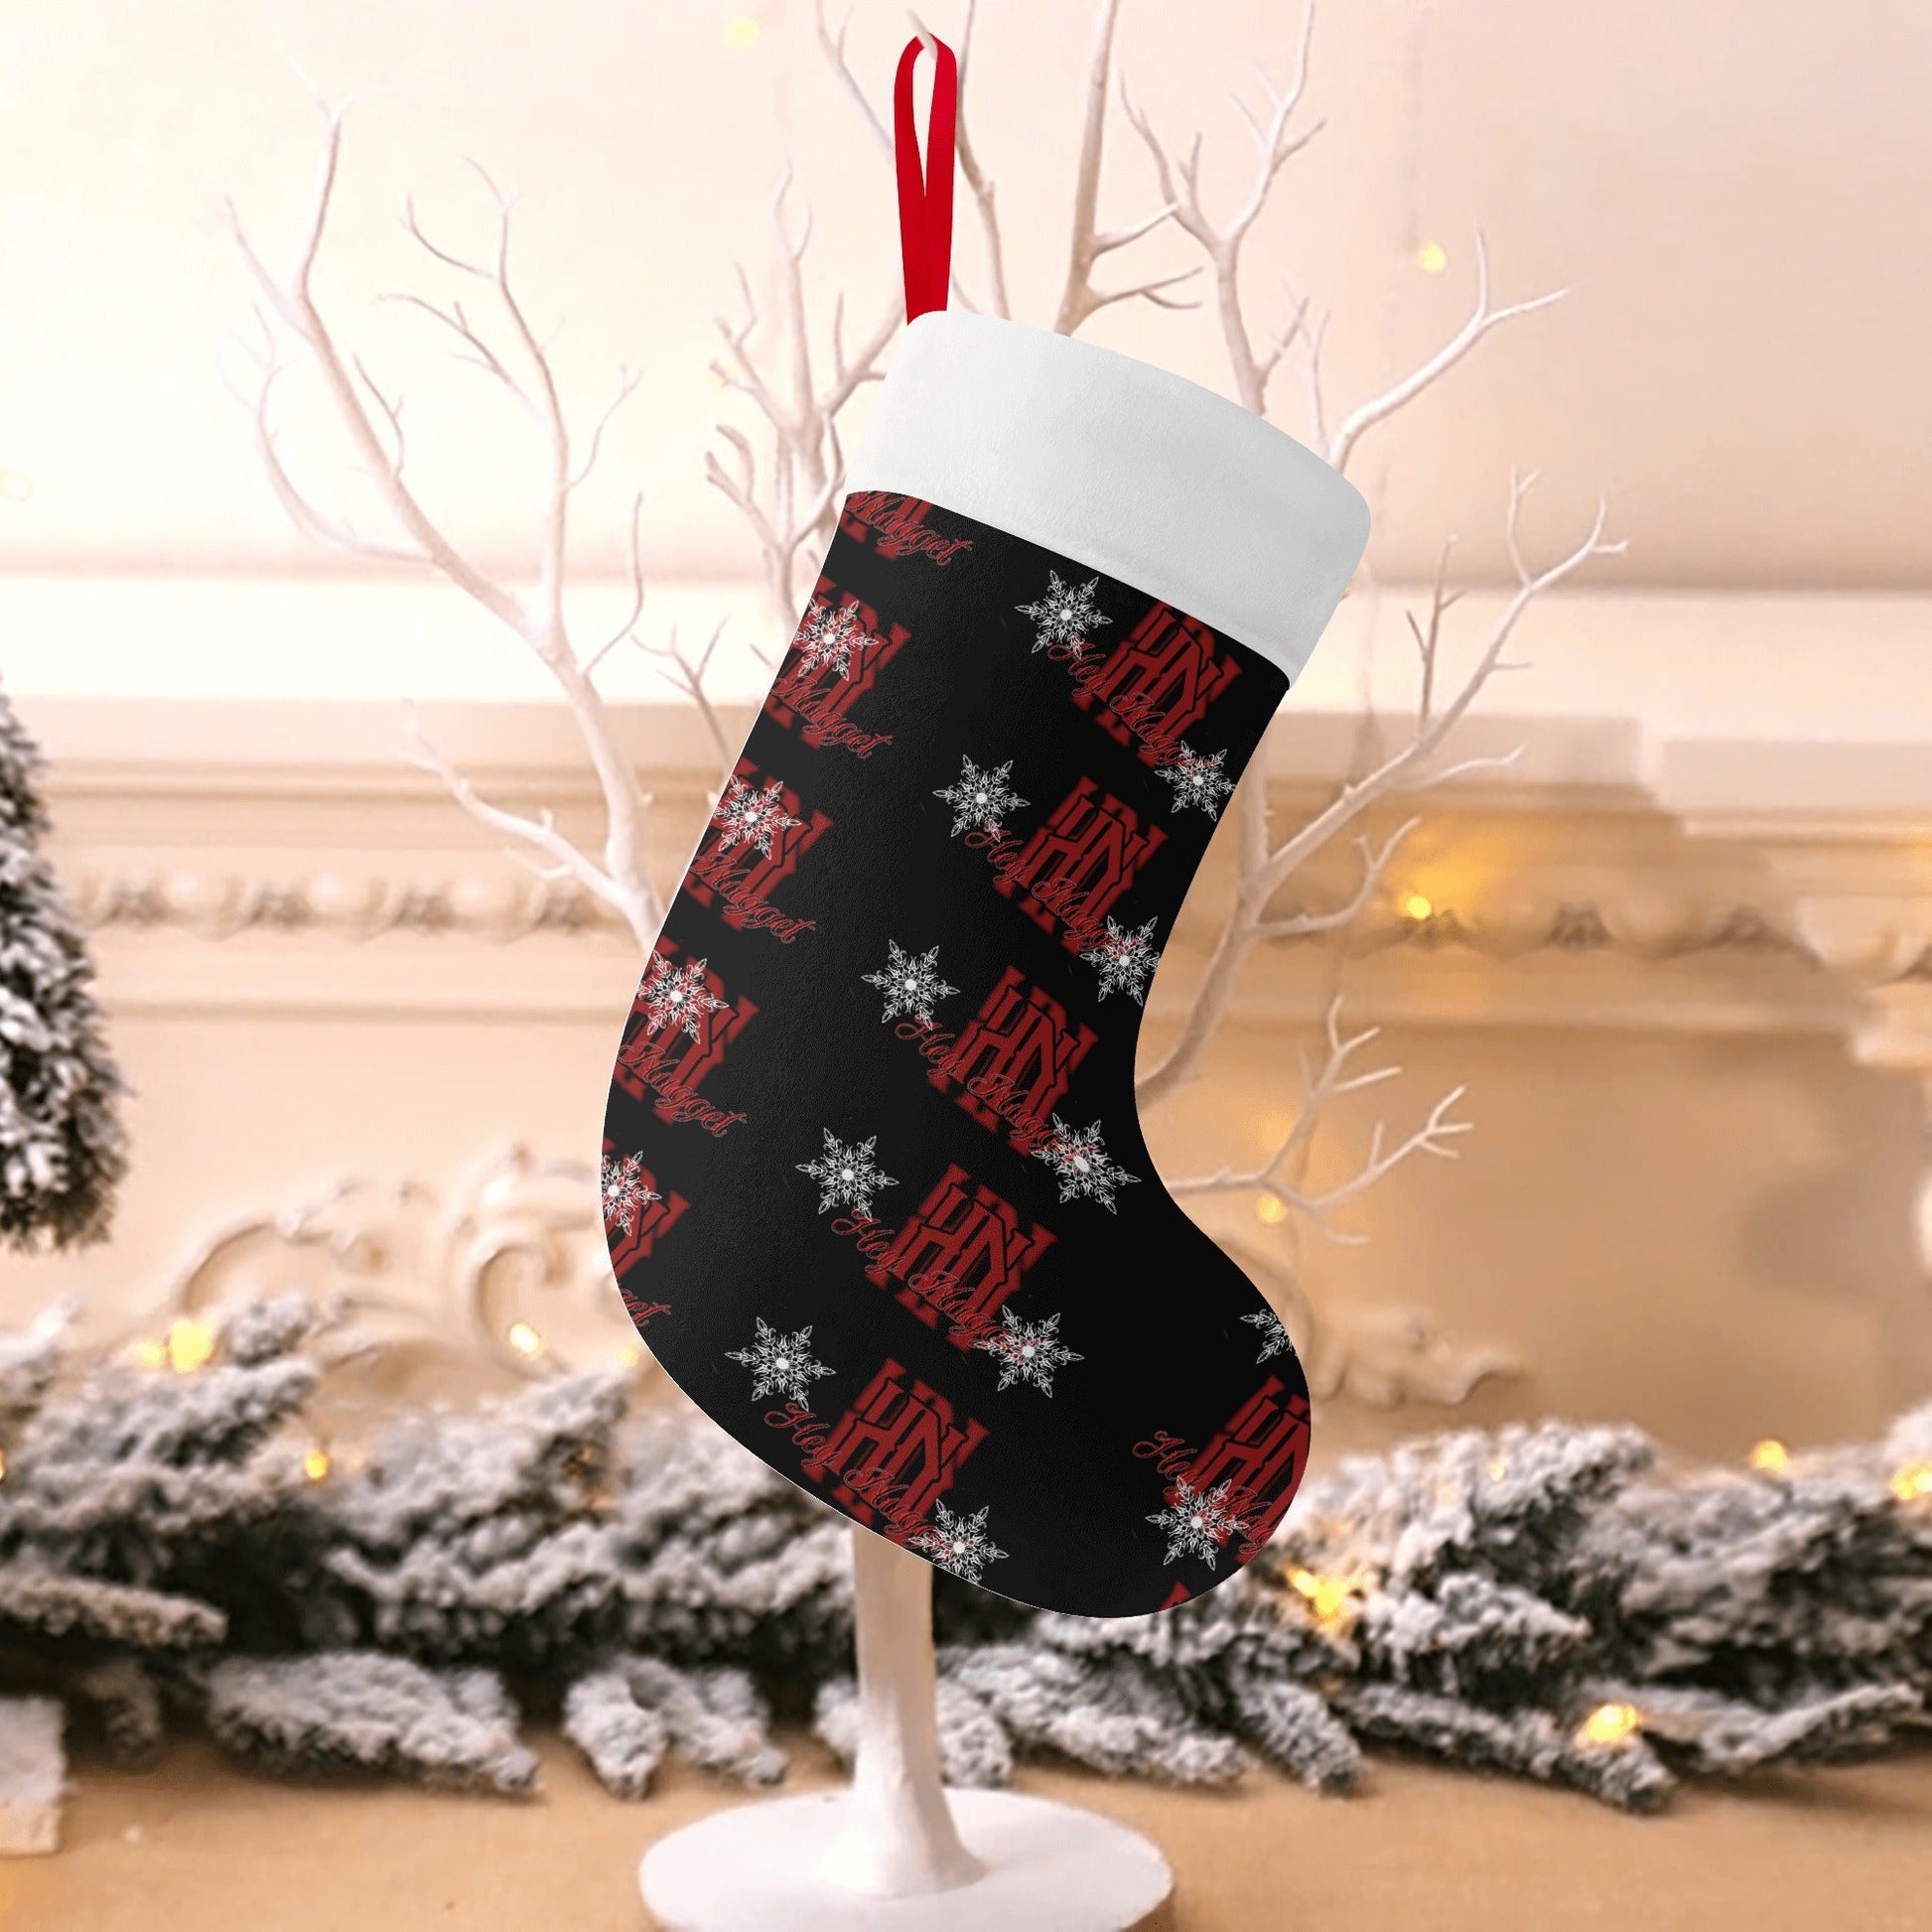 Stand out  with the  HN Christmas Stockings  available at Hey Nugget. Grab yours today!